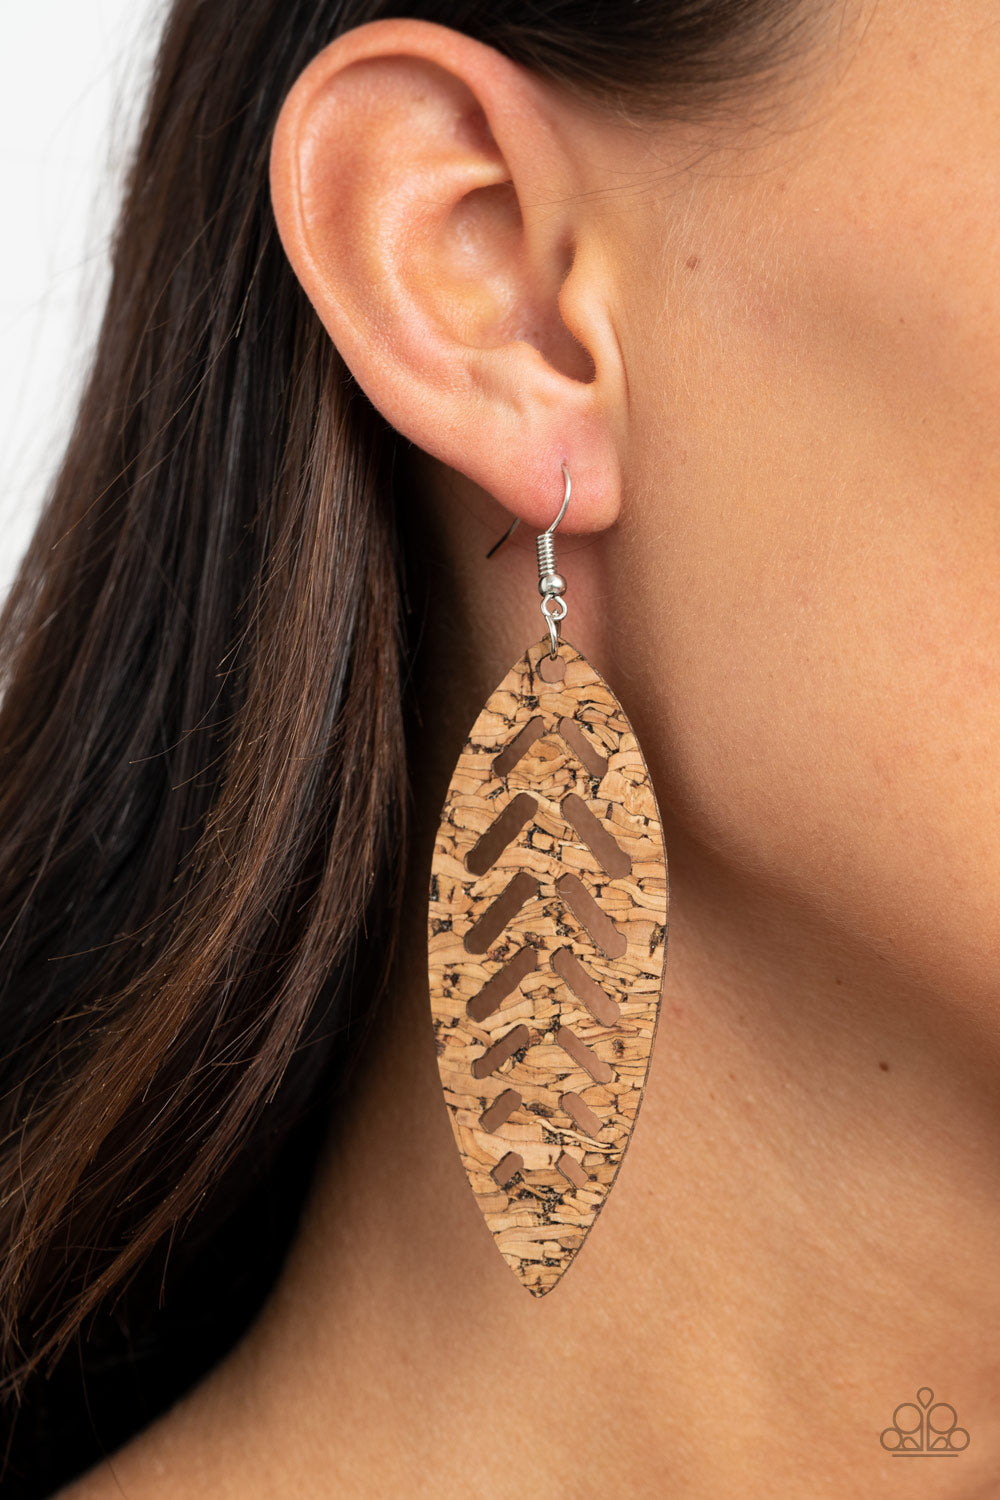 Paparazzi Jewelry & Accessories - You're Such a CORK - Earrings. Bling By Titia Boutique